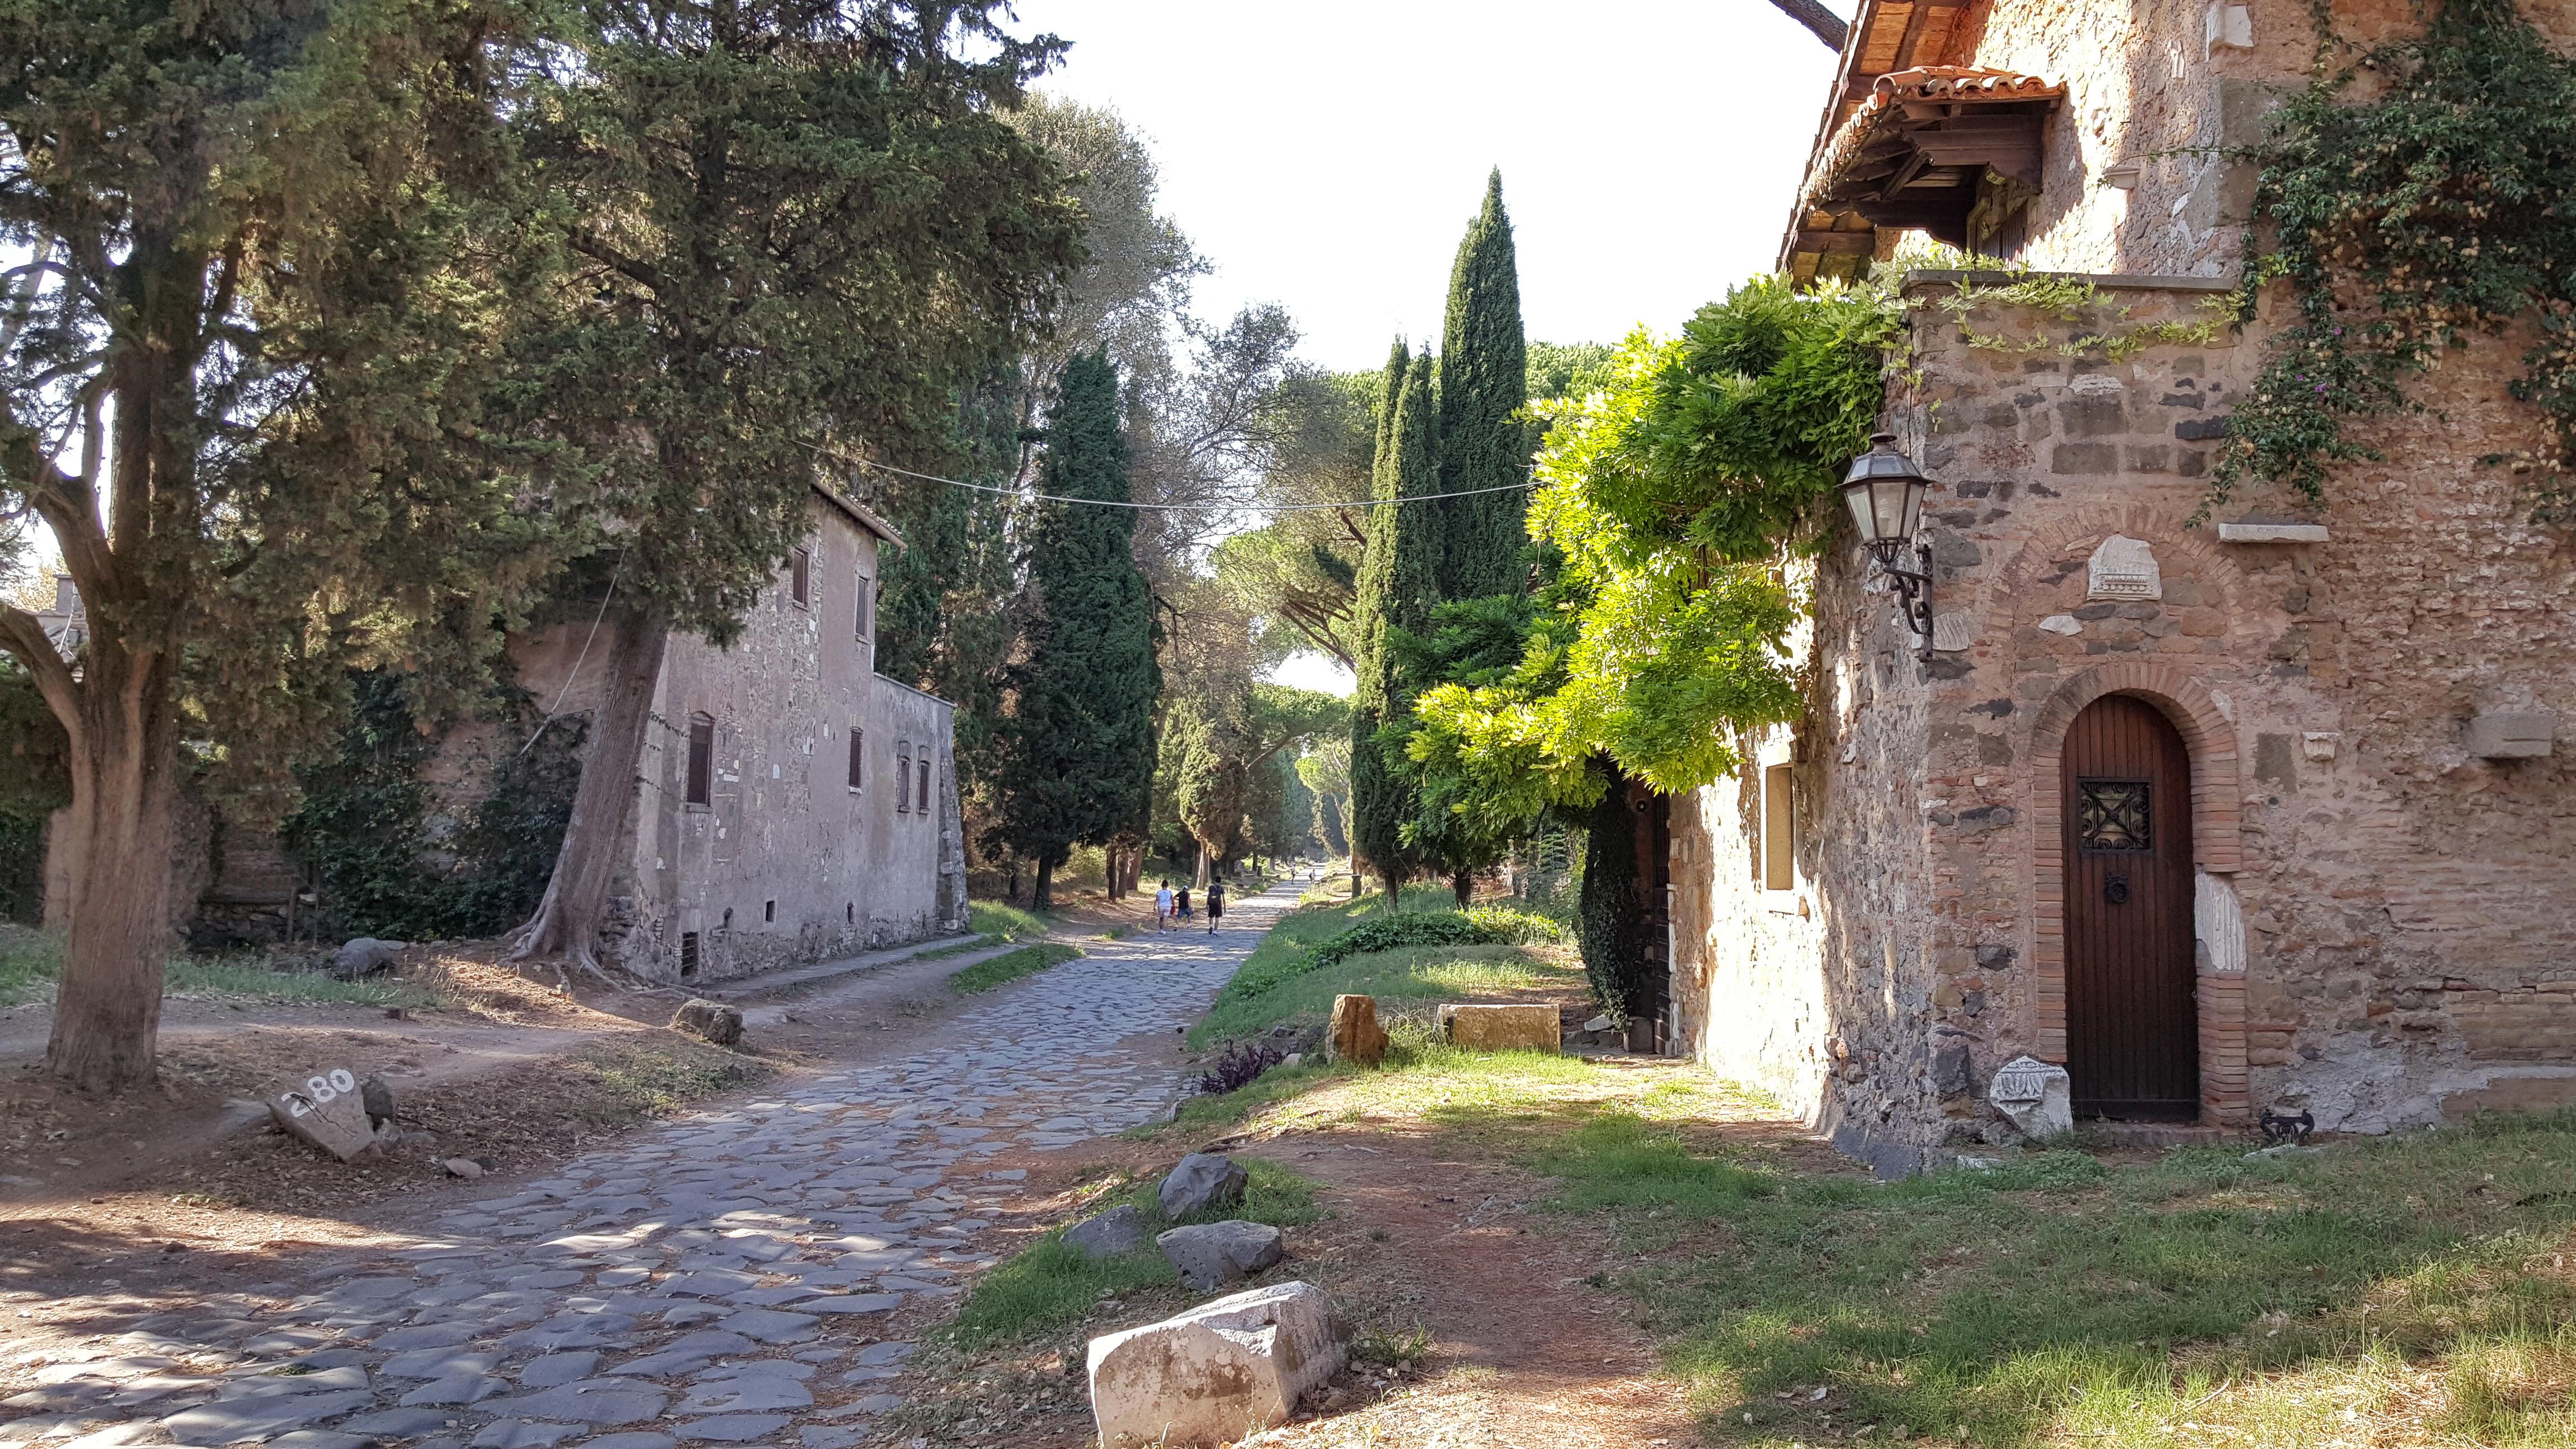 Via Appia Antica (312 BC) in Rome, Italy. Is one of the earliest and most important Roman roads. It is still possible to walk it today.jpeg